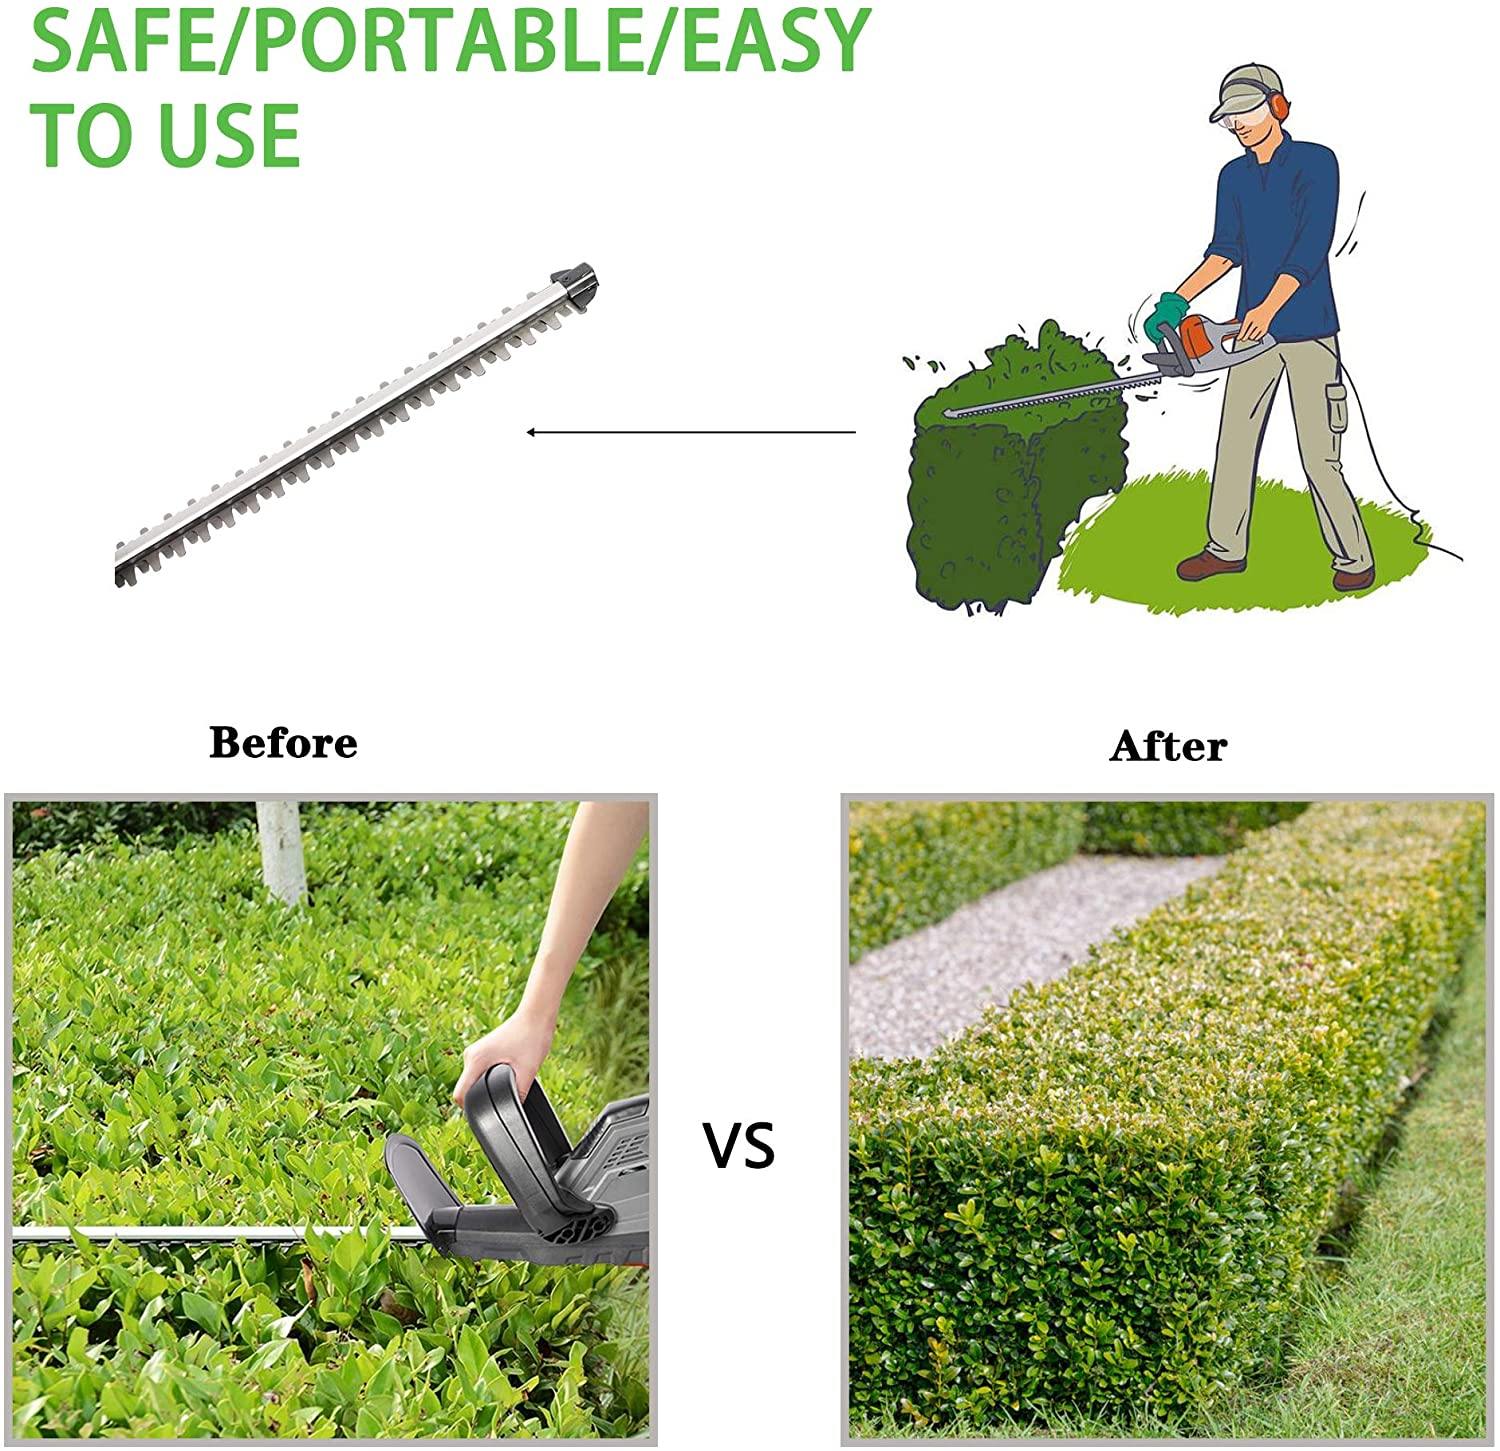 23 Inch Cordless Hedge Trimmer YL-580E 20V Electric Garden Tool - Bosonshop